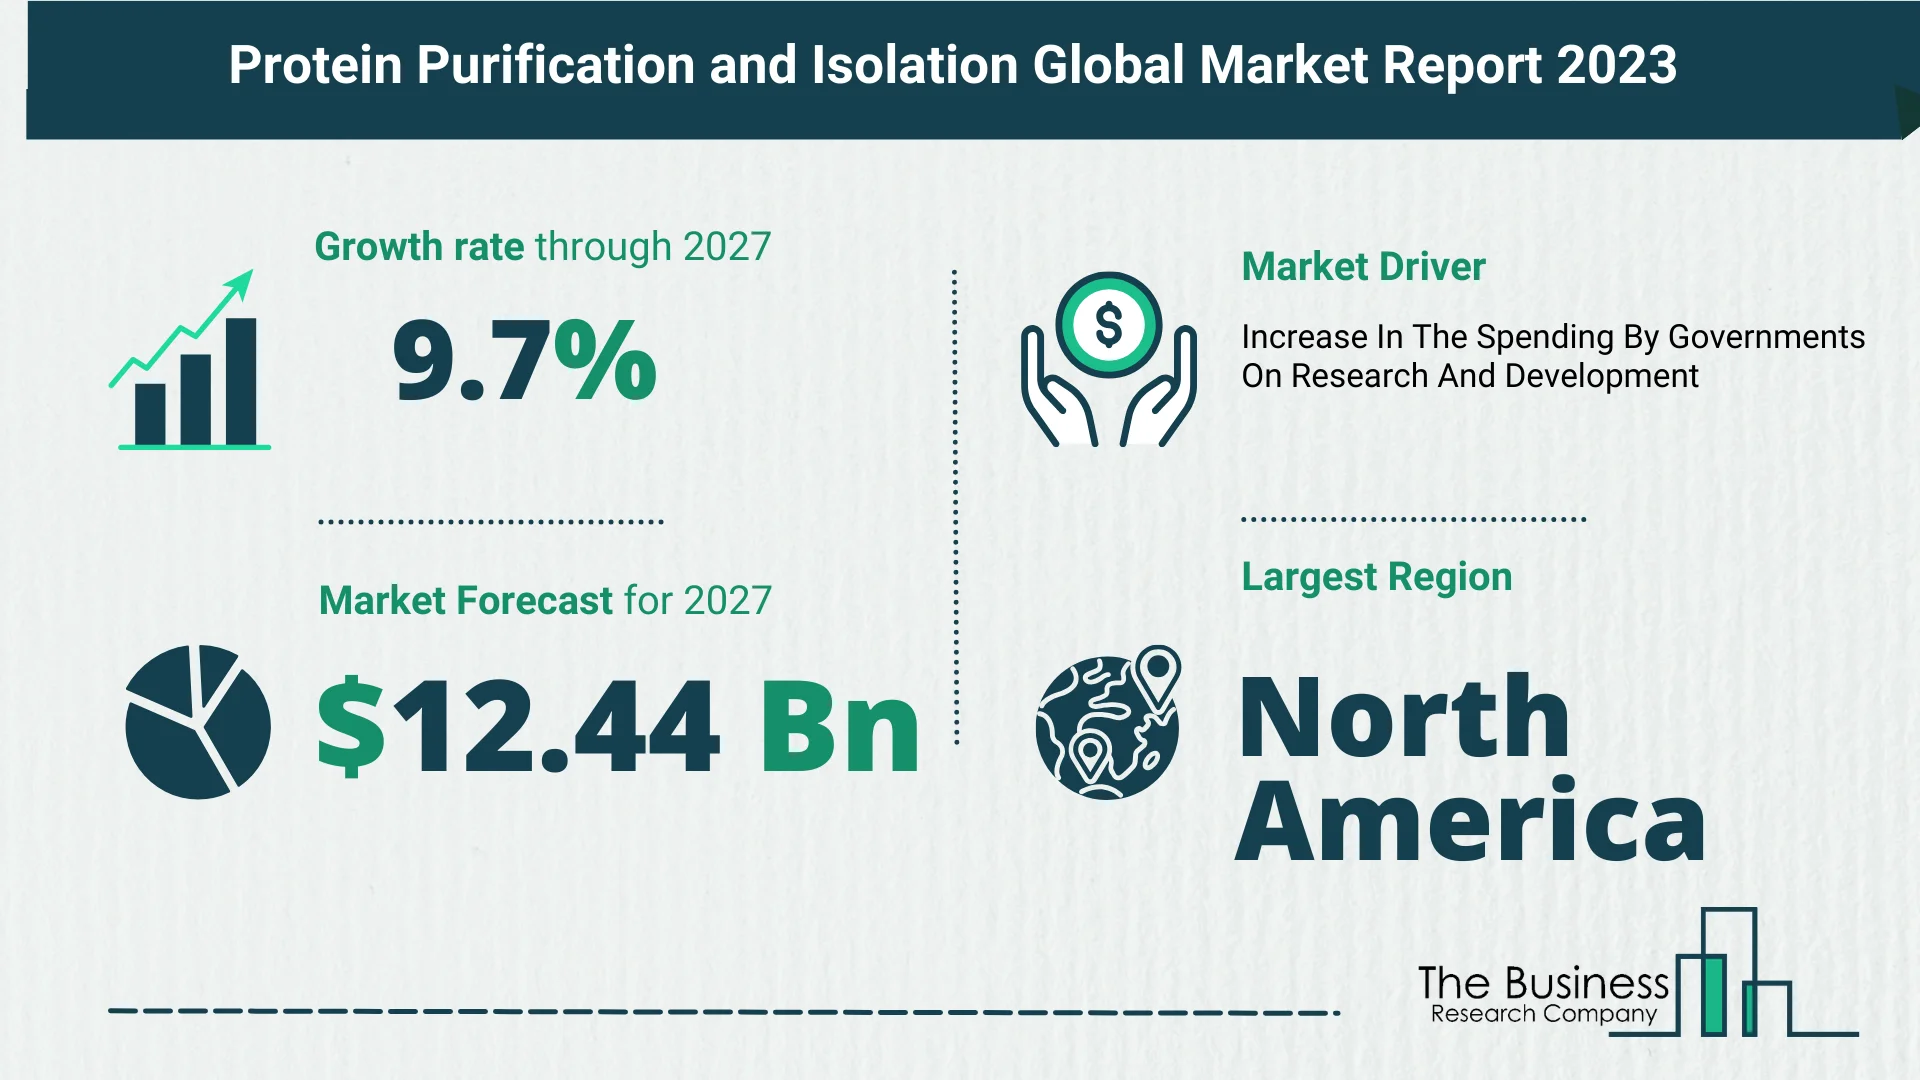 Global Protein Purification and Isolation Market